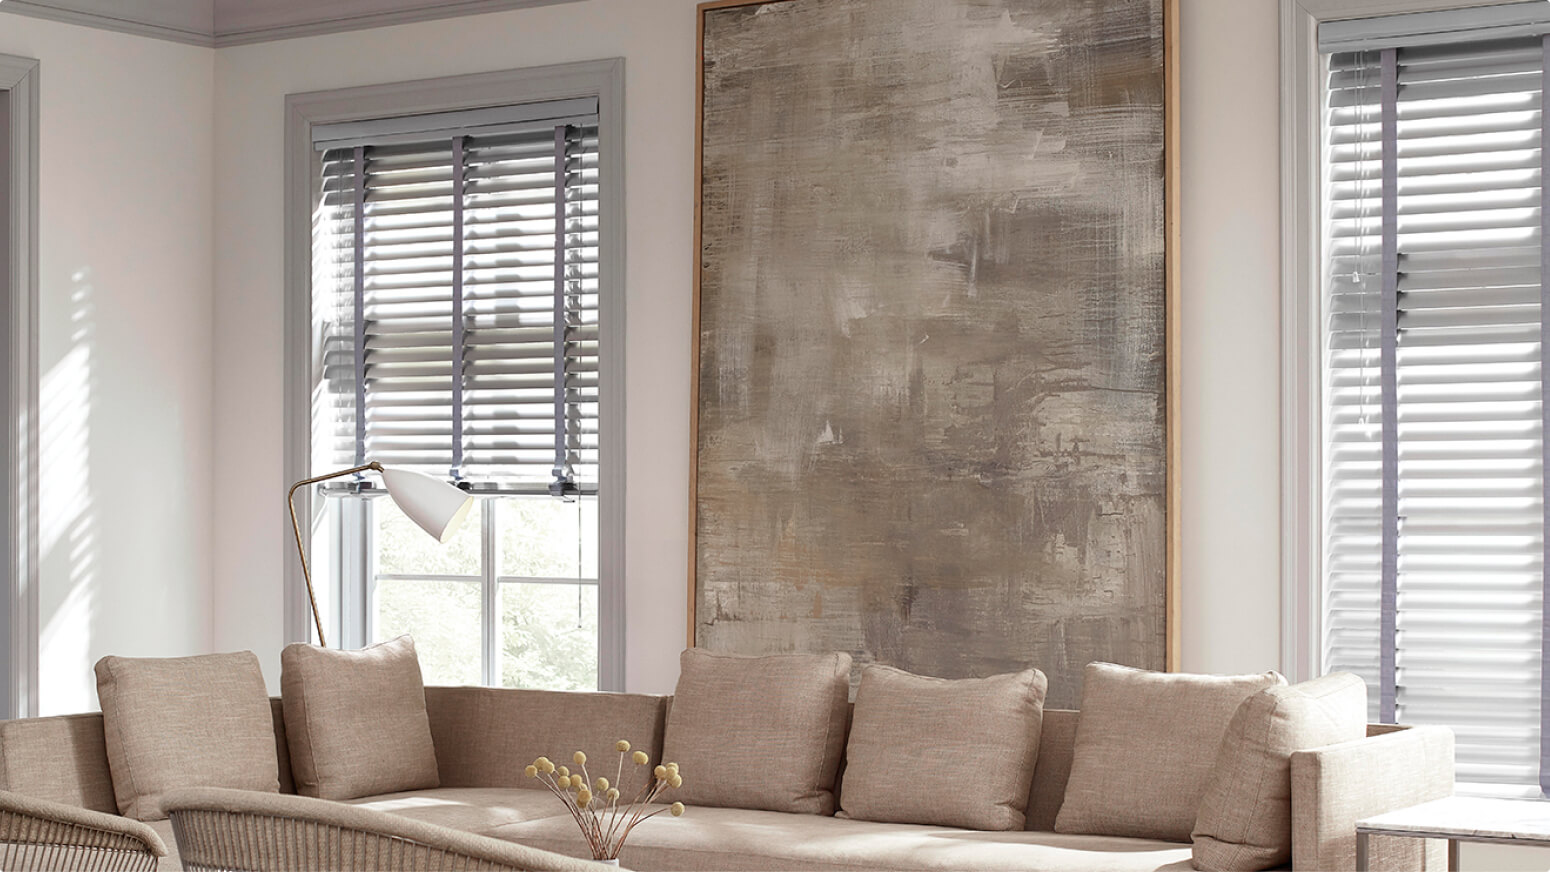 Transform the ambiance of your living space with our exceptional collection of window coverings. Your windows deserve nothing but the finest, most elegant treatments that effortlessly blend style and functionality. Introducing an extraordinary range of Roman shades that will add a touch of sophistication and warmth to any room.